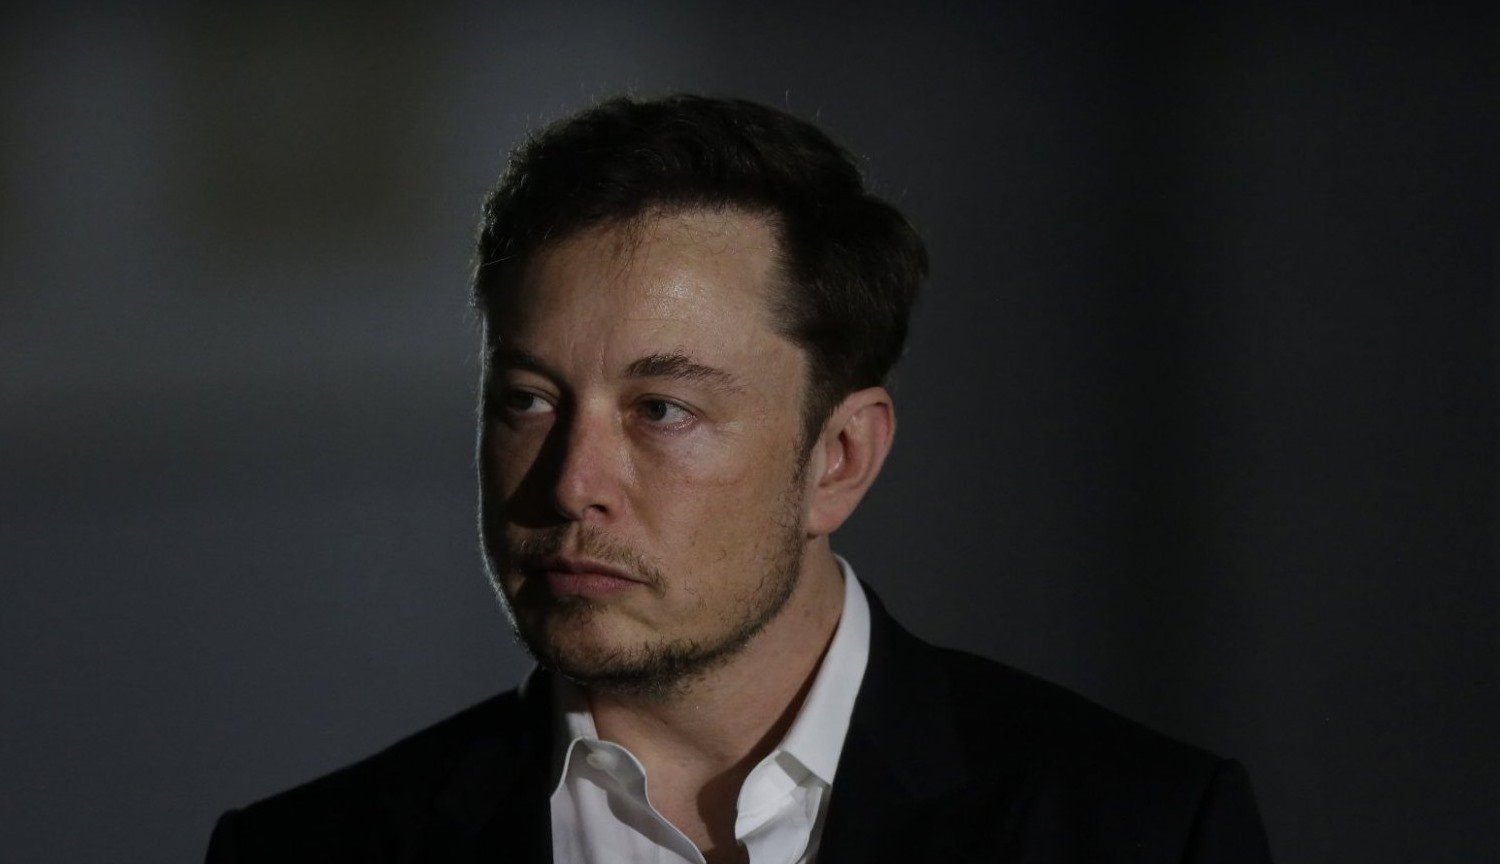 Tesla lost a billion dollars for 2018, but Elon Musk is not discouraged